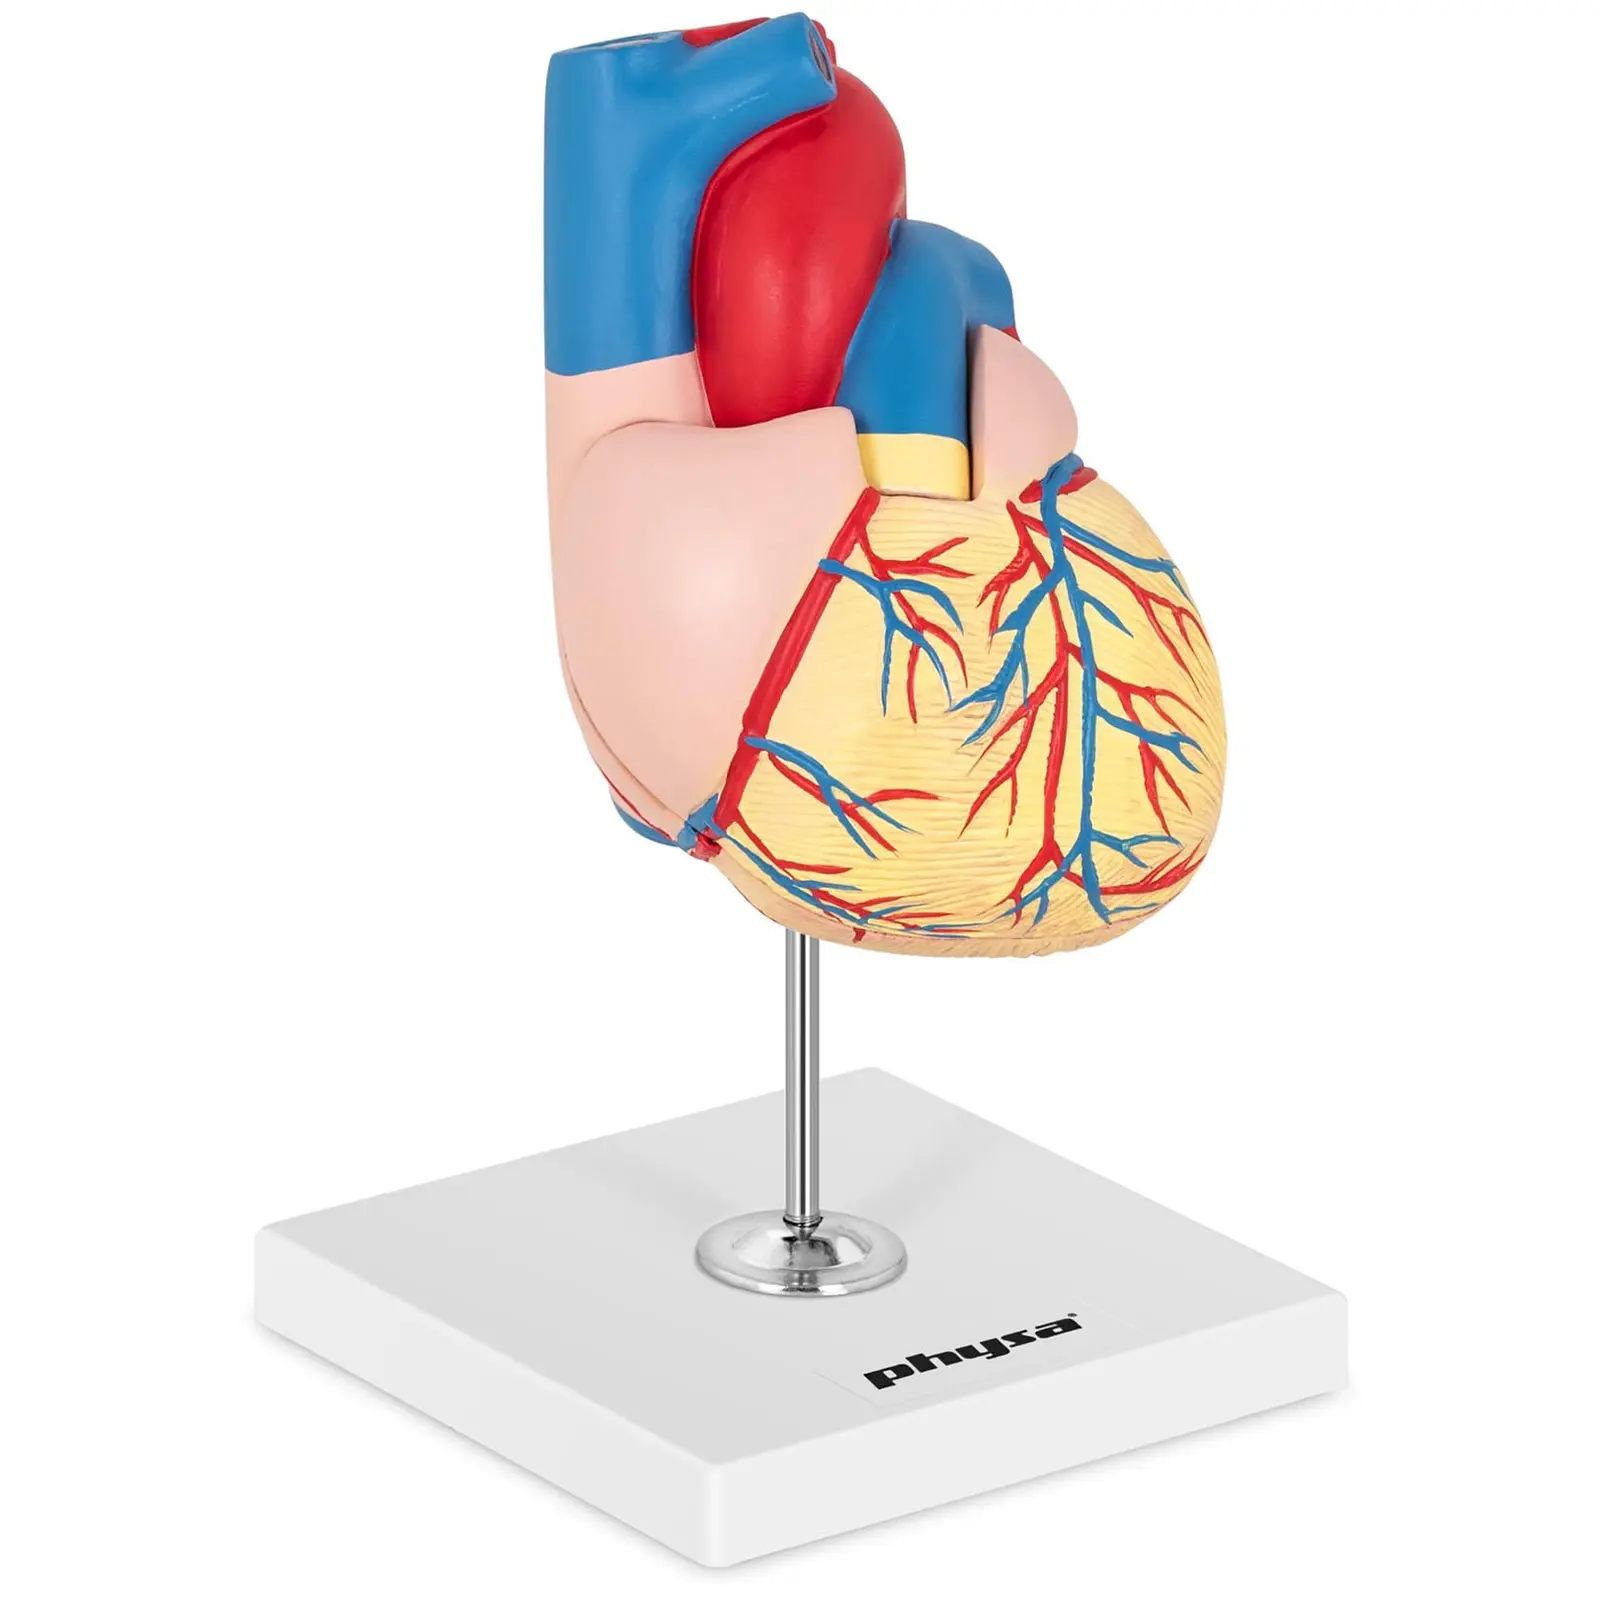 Heart Model - separable into 2 parts - life-sized